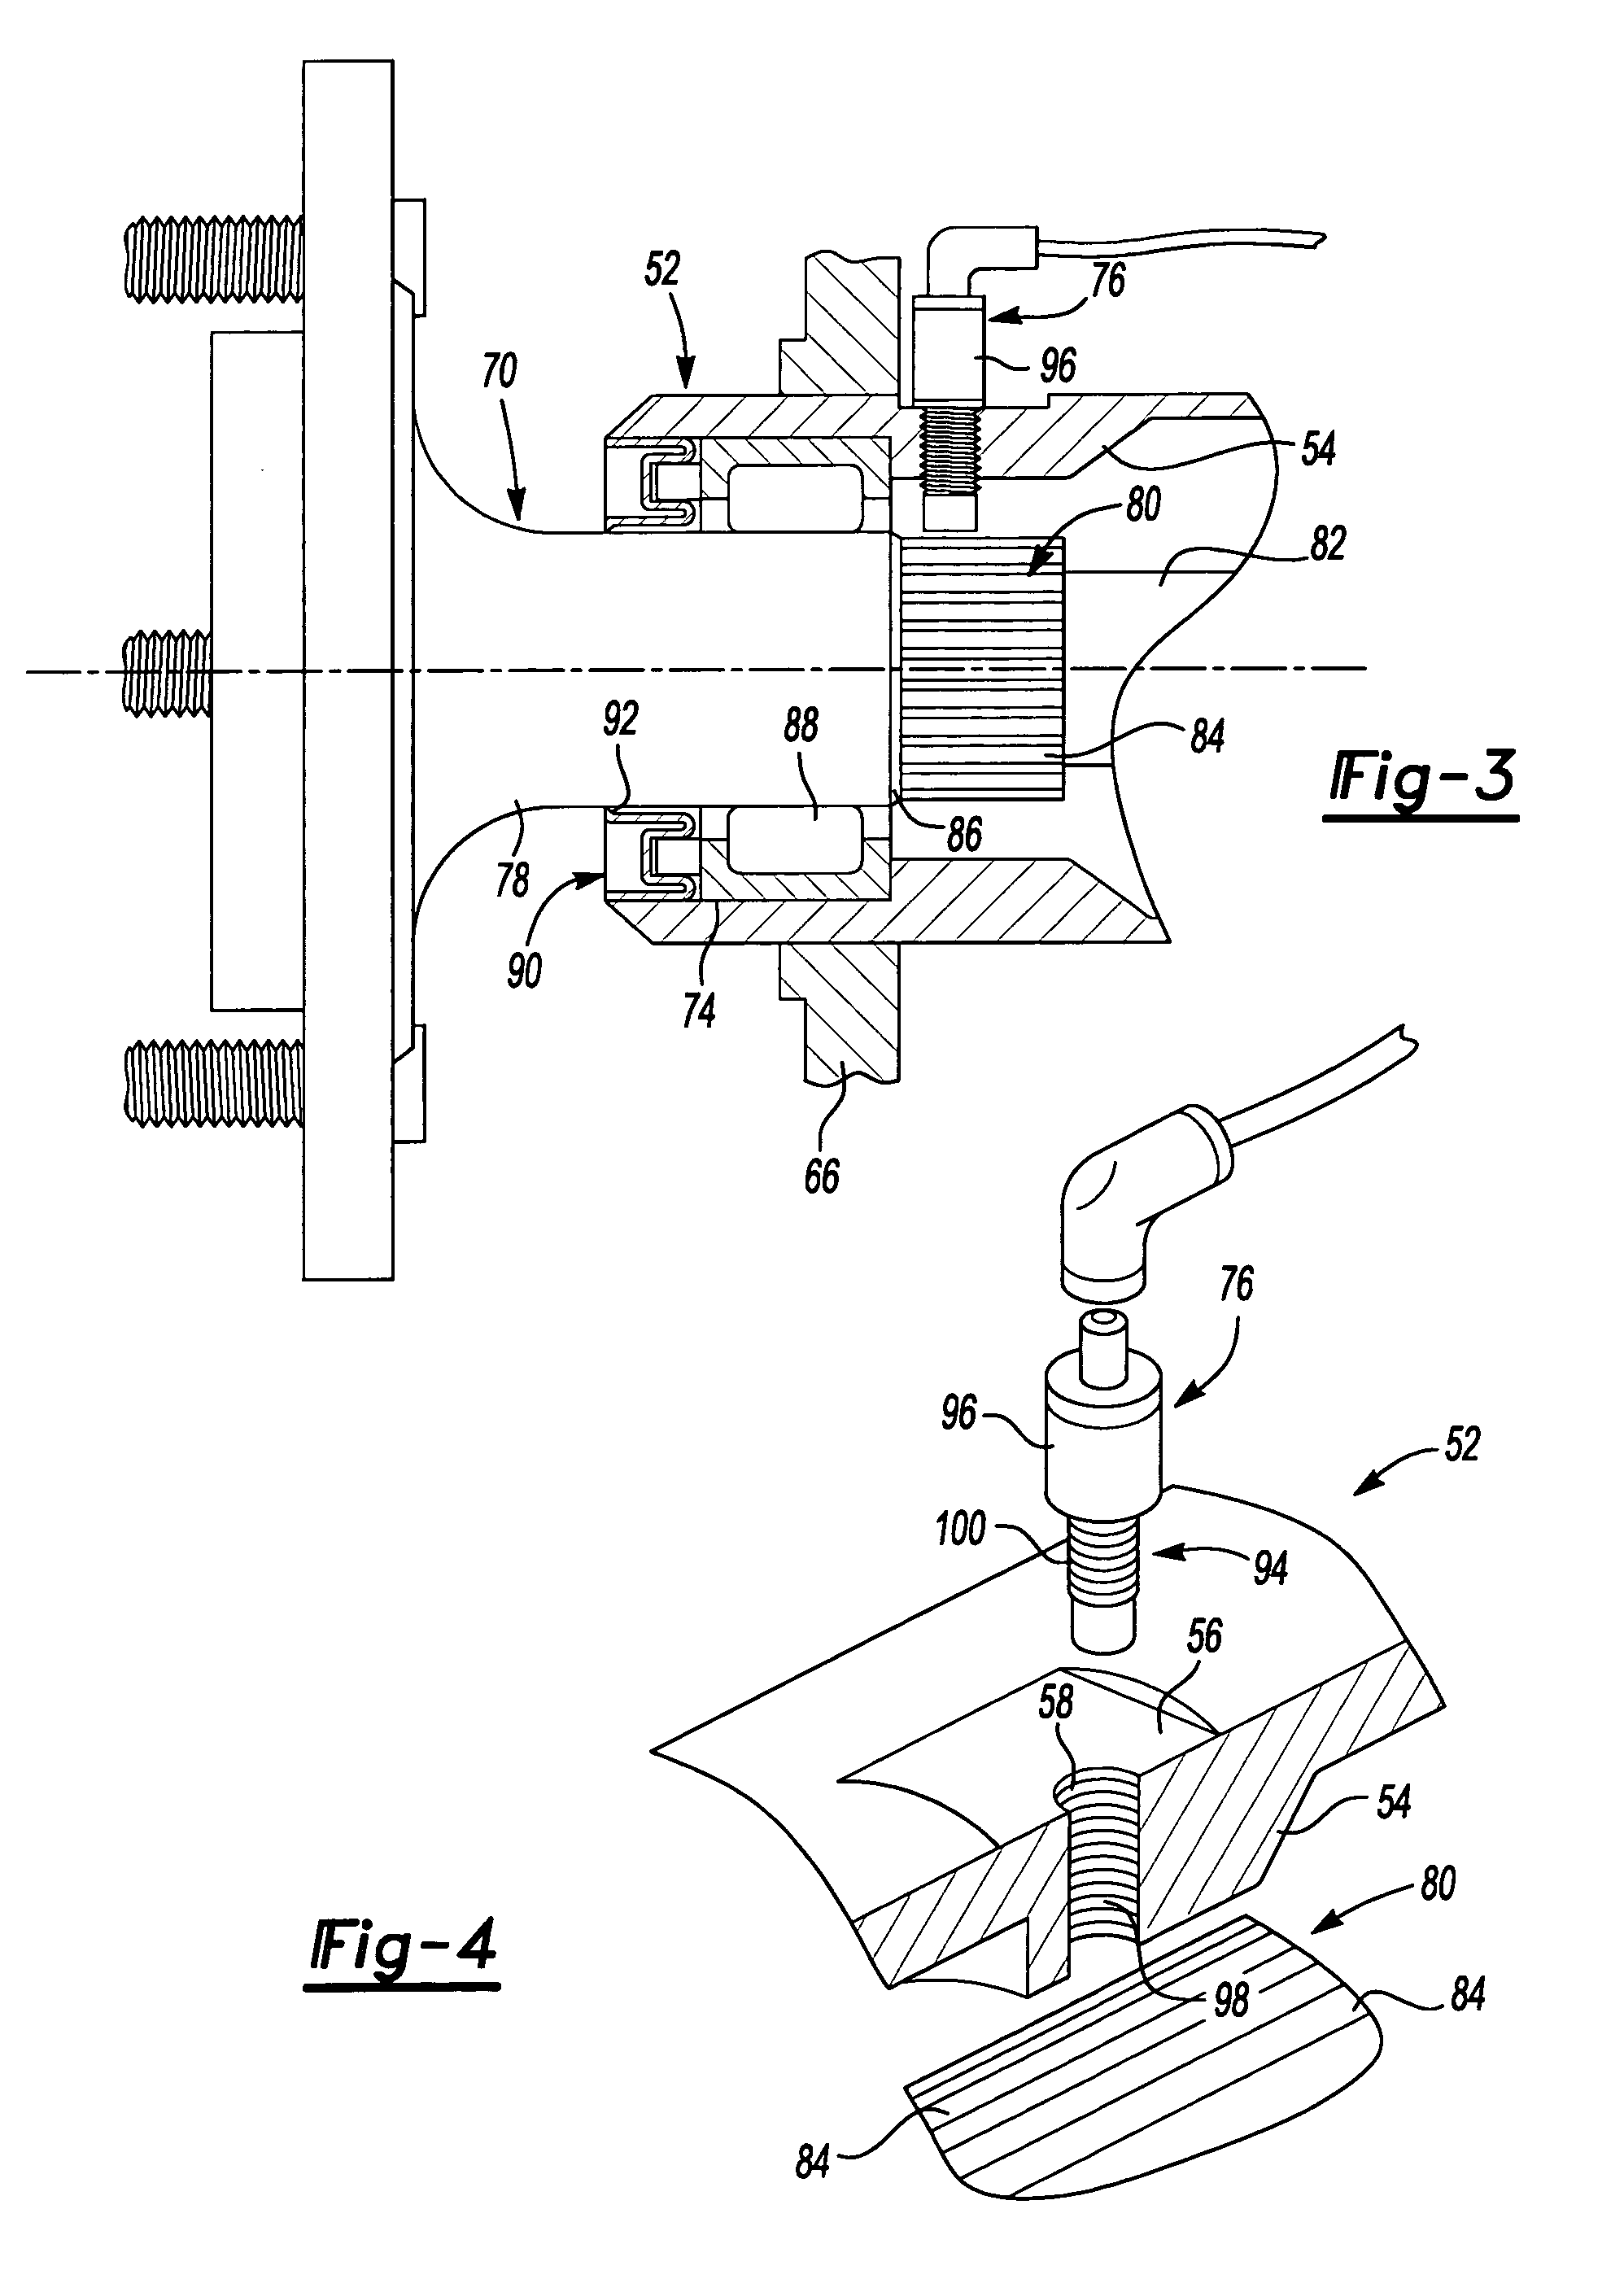 Beam axle with integral sensor mount and target